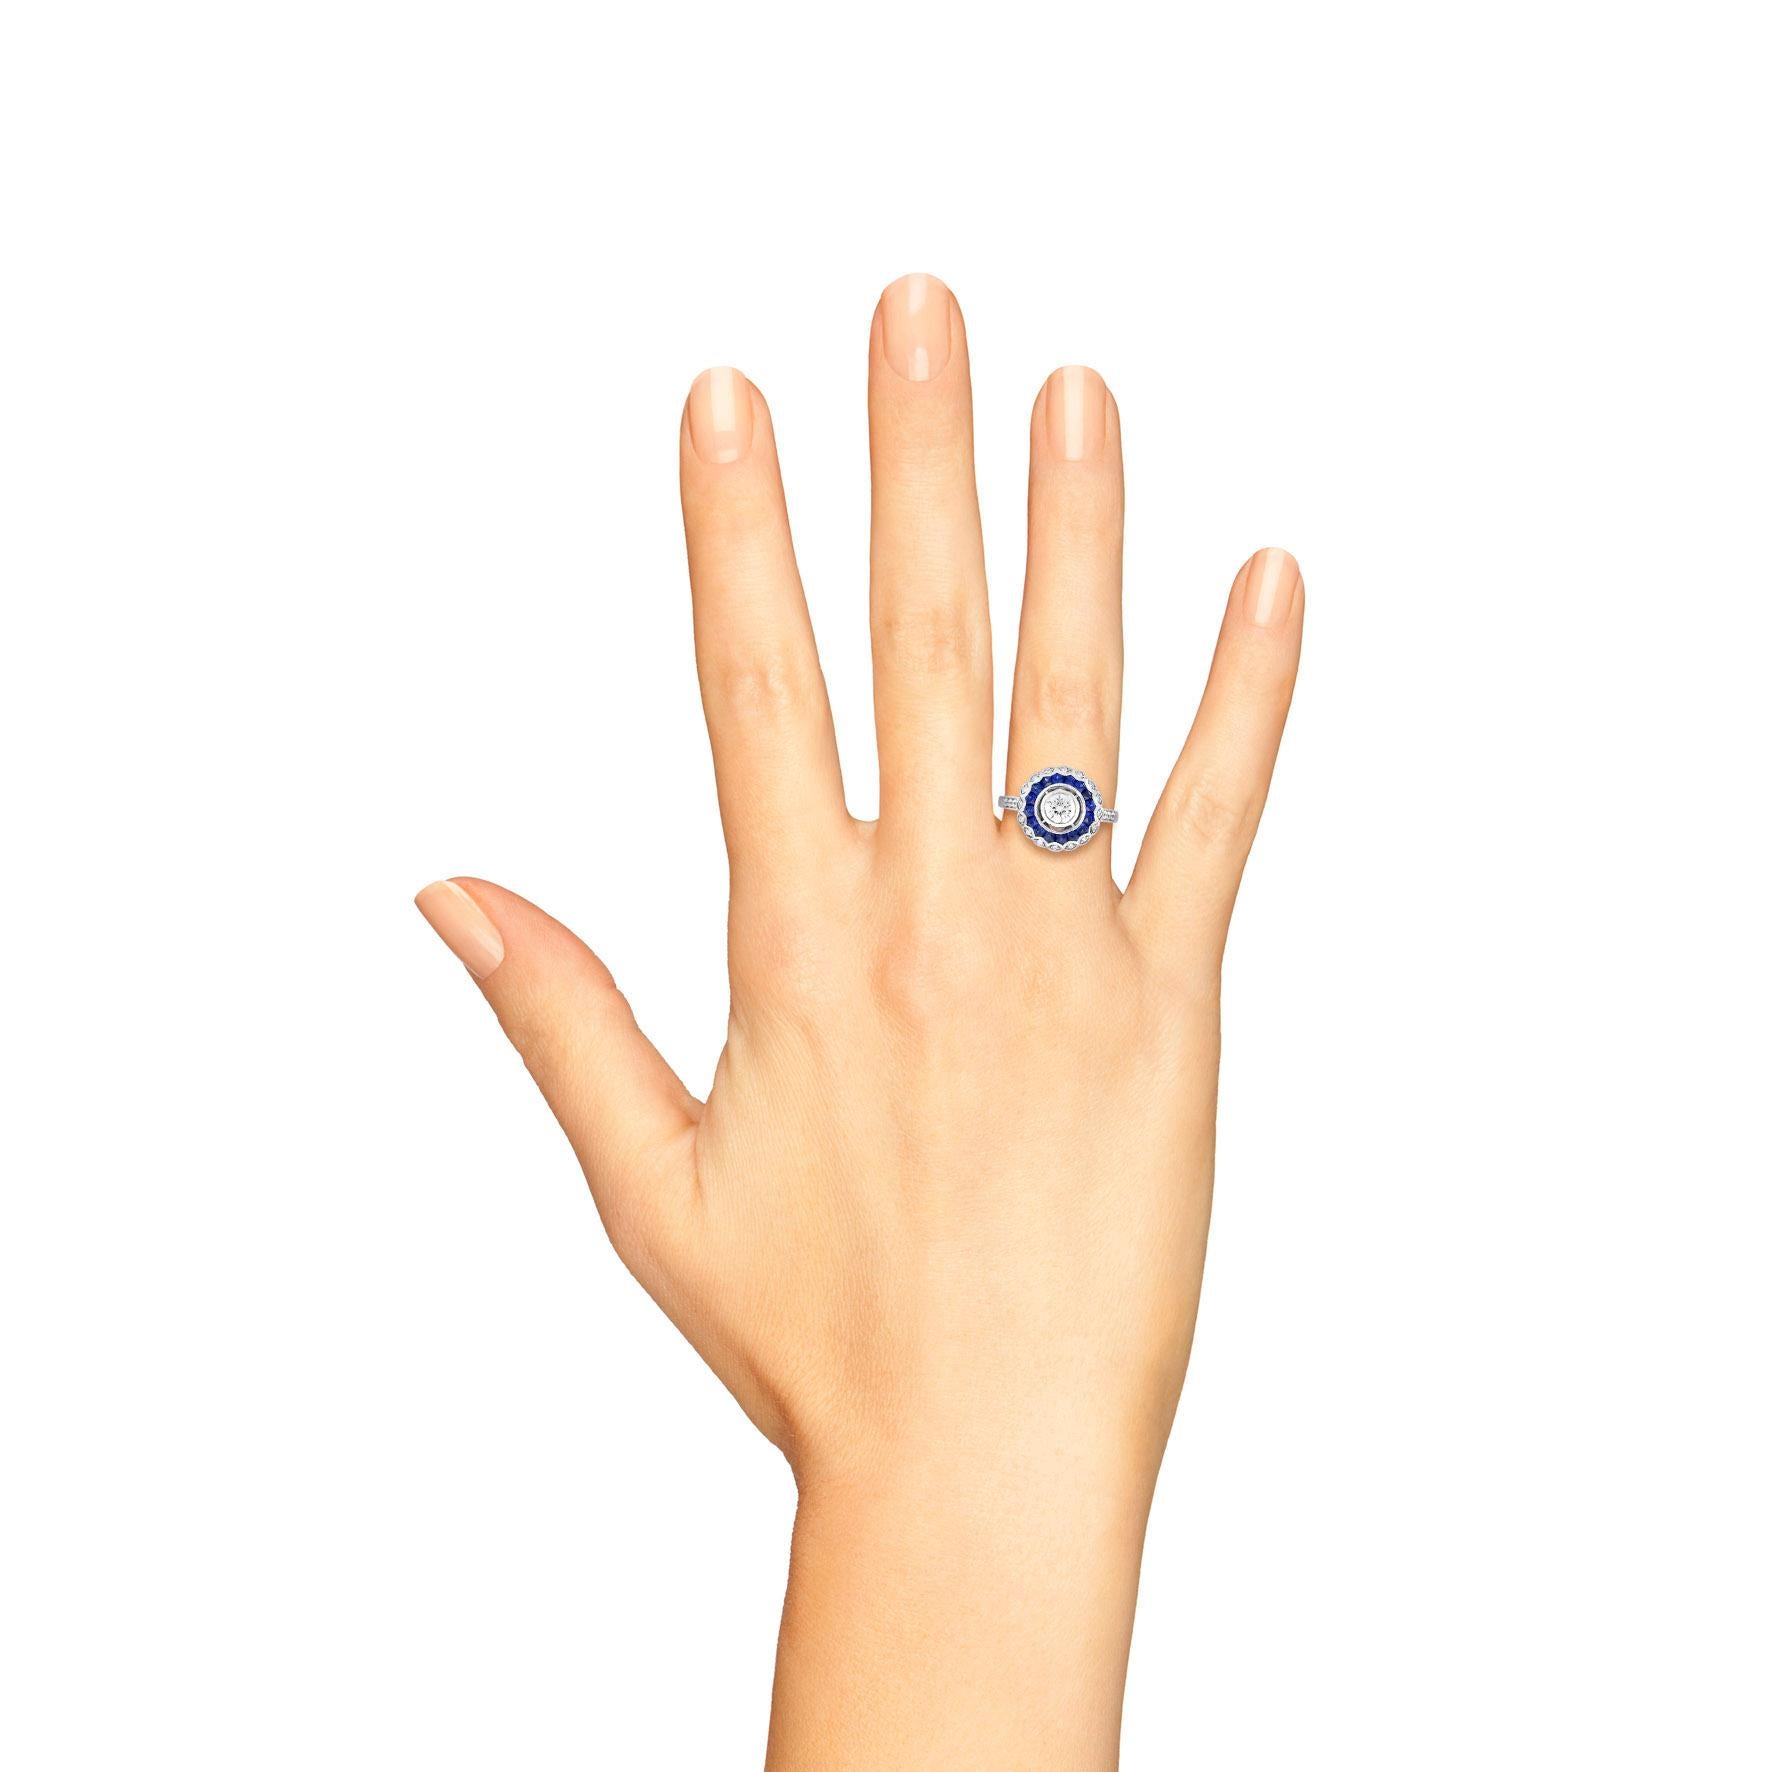 This beautiful ring is a vintage inspired style, the popular halo ring features oval H color SI clarity diamond for its center, surrounded by French cut blue sapphire and round diamonds. This would make a wonderful engagement ring, or to commemorate